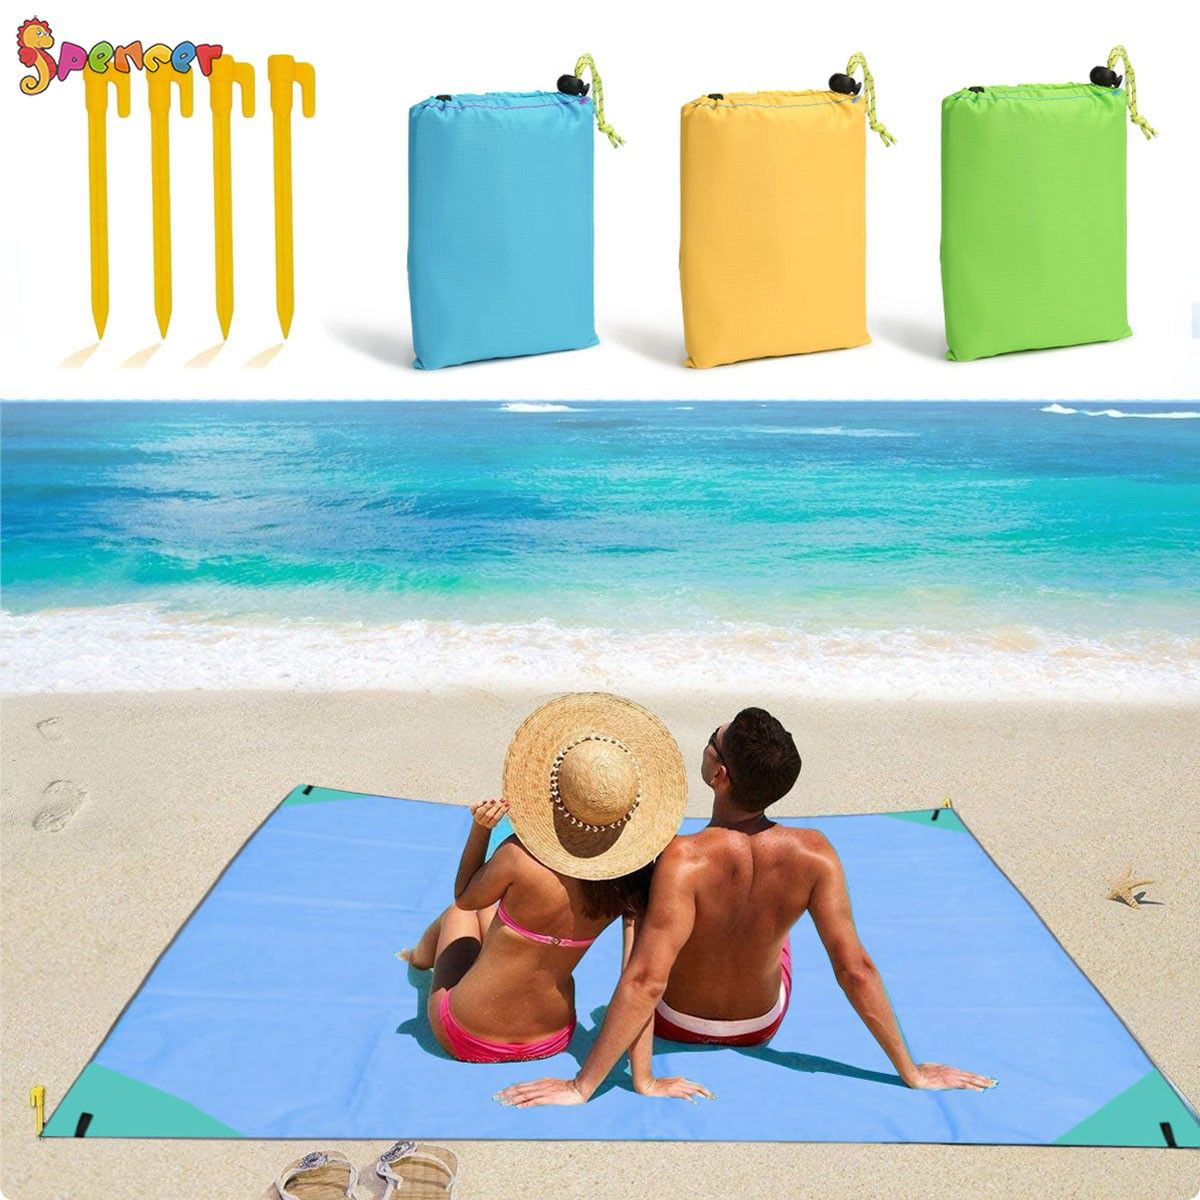 Sand and Waterproof for Outdoor Travel Compact Beach Mat for Camping Durable Nylon Design Foldable Pocket Blanket Metal Stakes Included Picnic or Festival Use Hiking